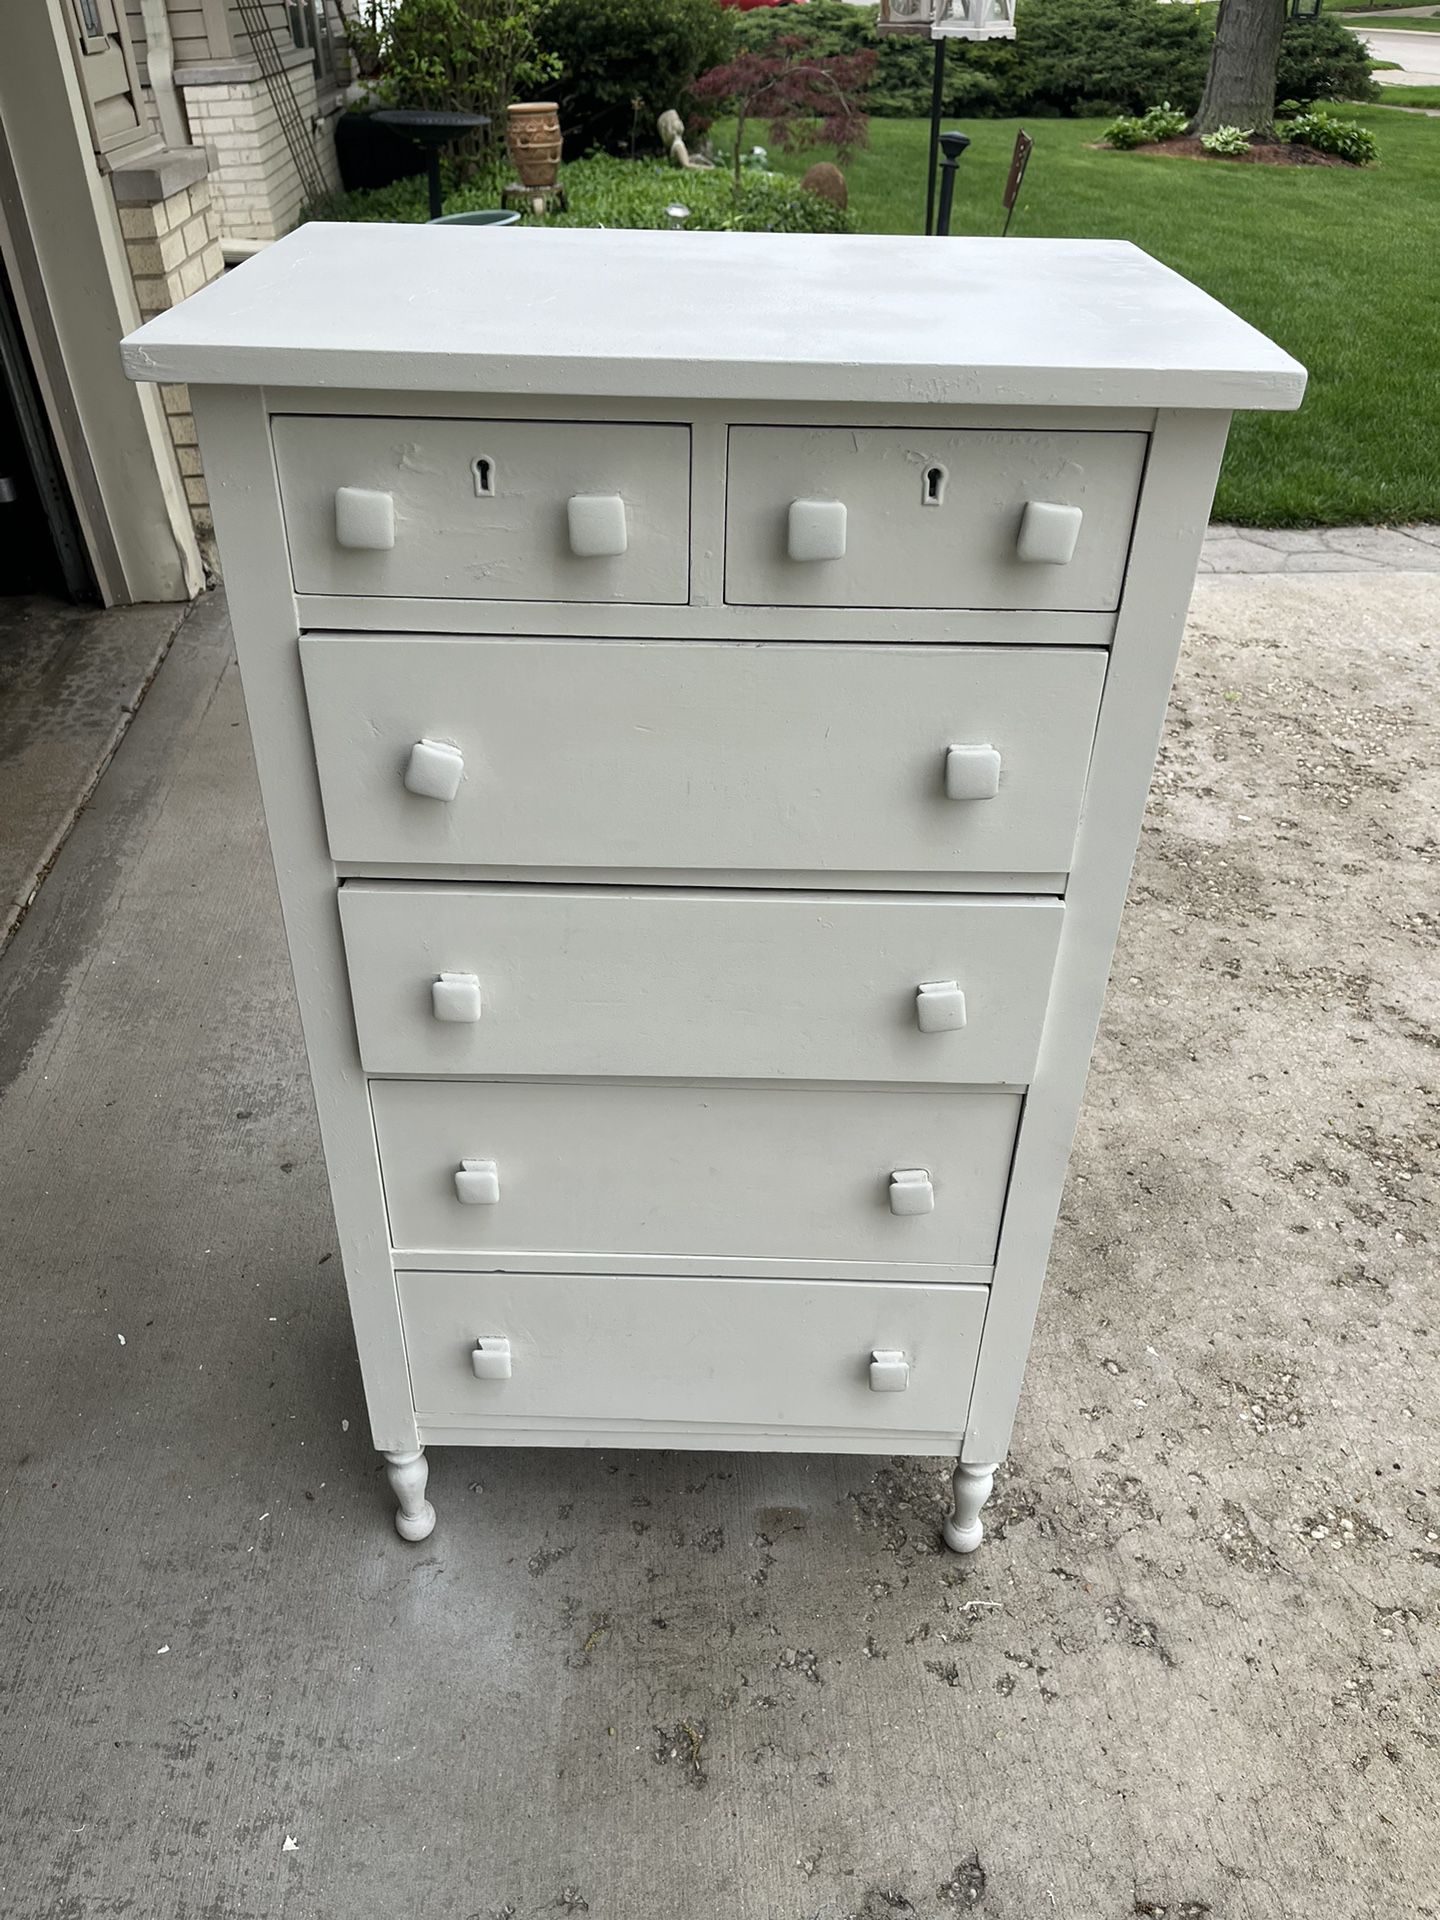 Antique, Vintage White Dresser With Six Drawers